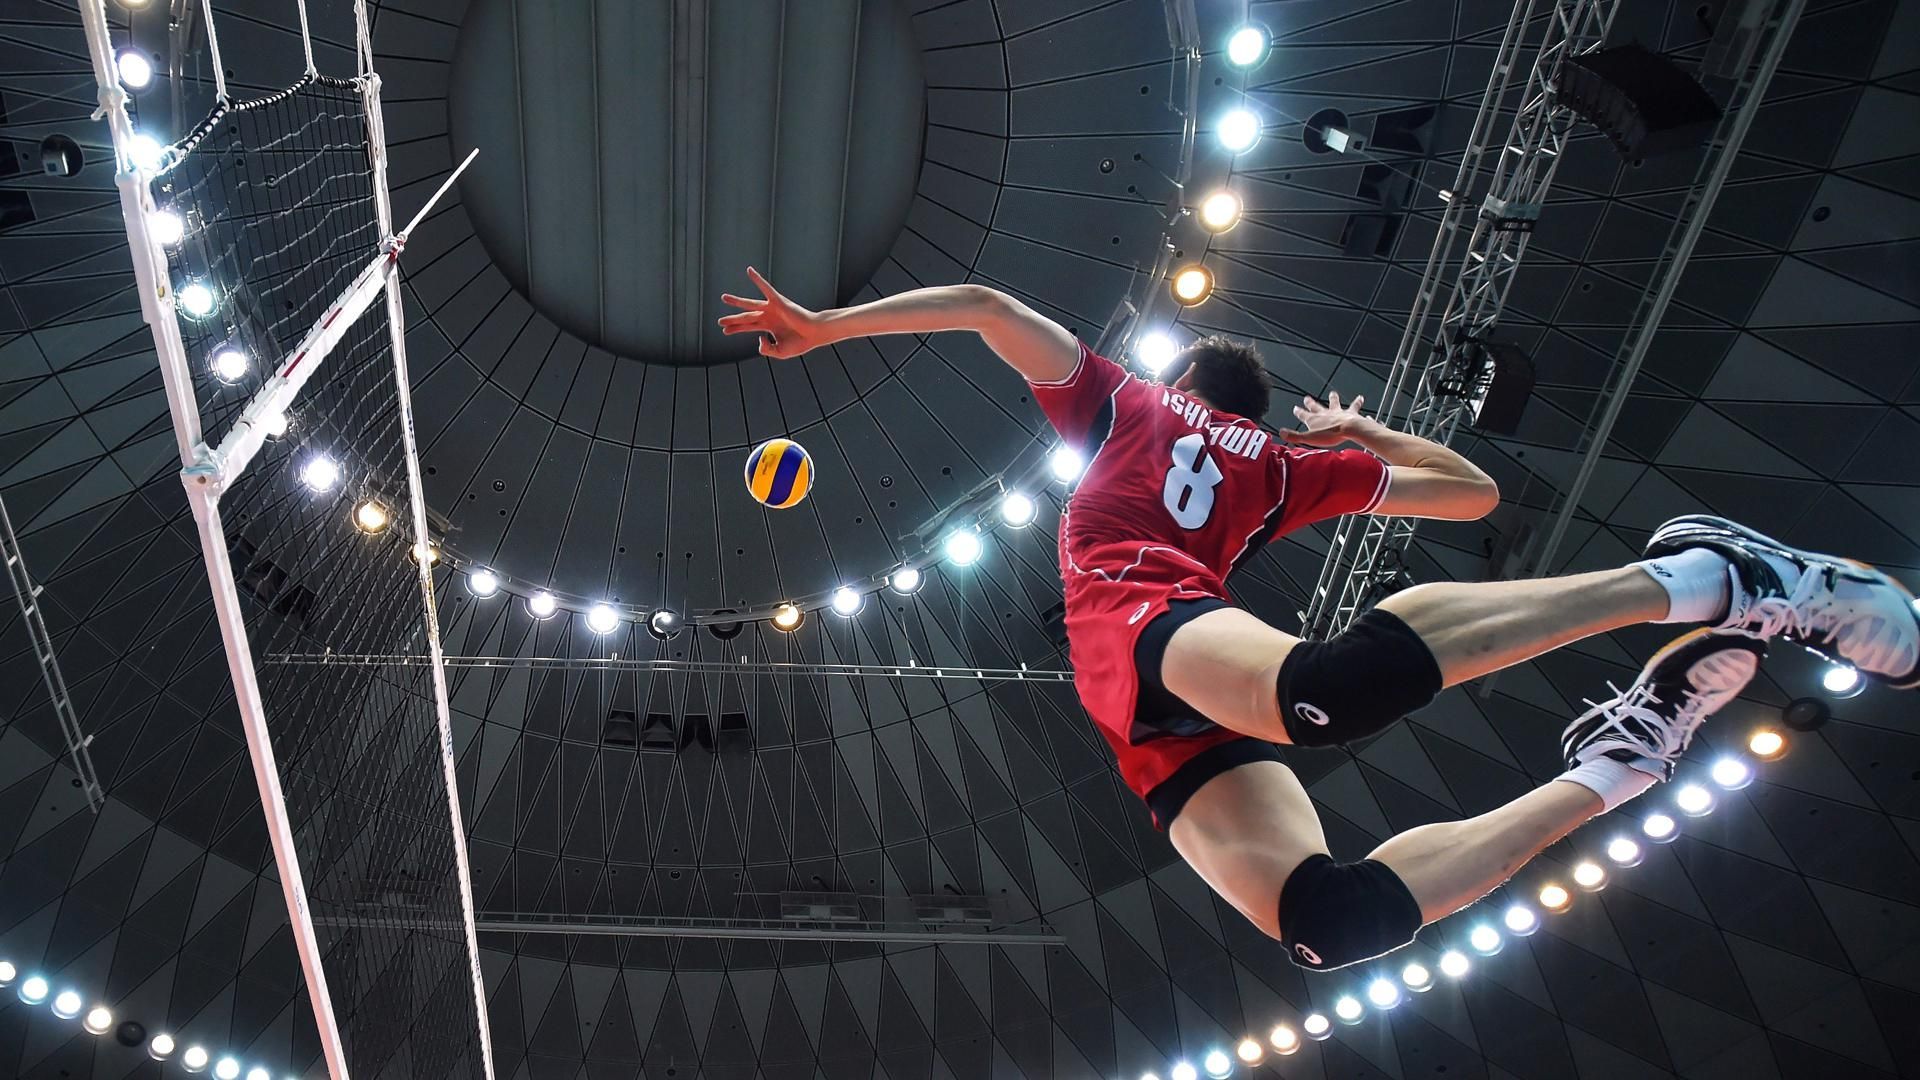 Men's Volleyball Wallpaper For Android. Volleyball wallpaper, Mens volleyball, Volleyball